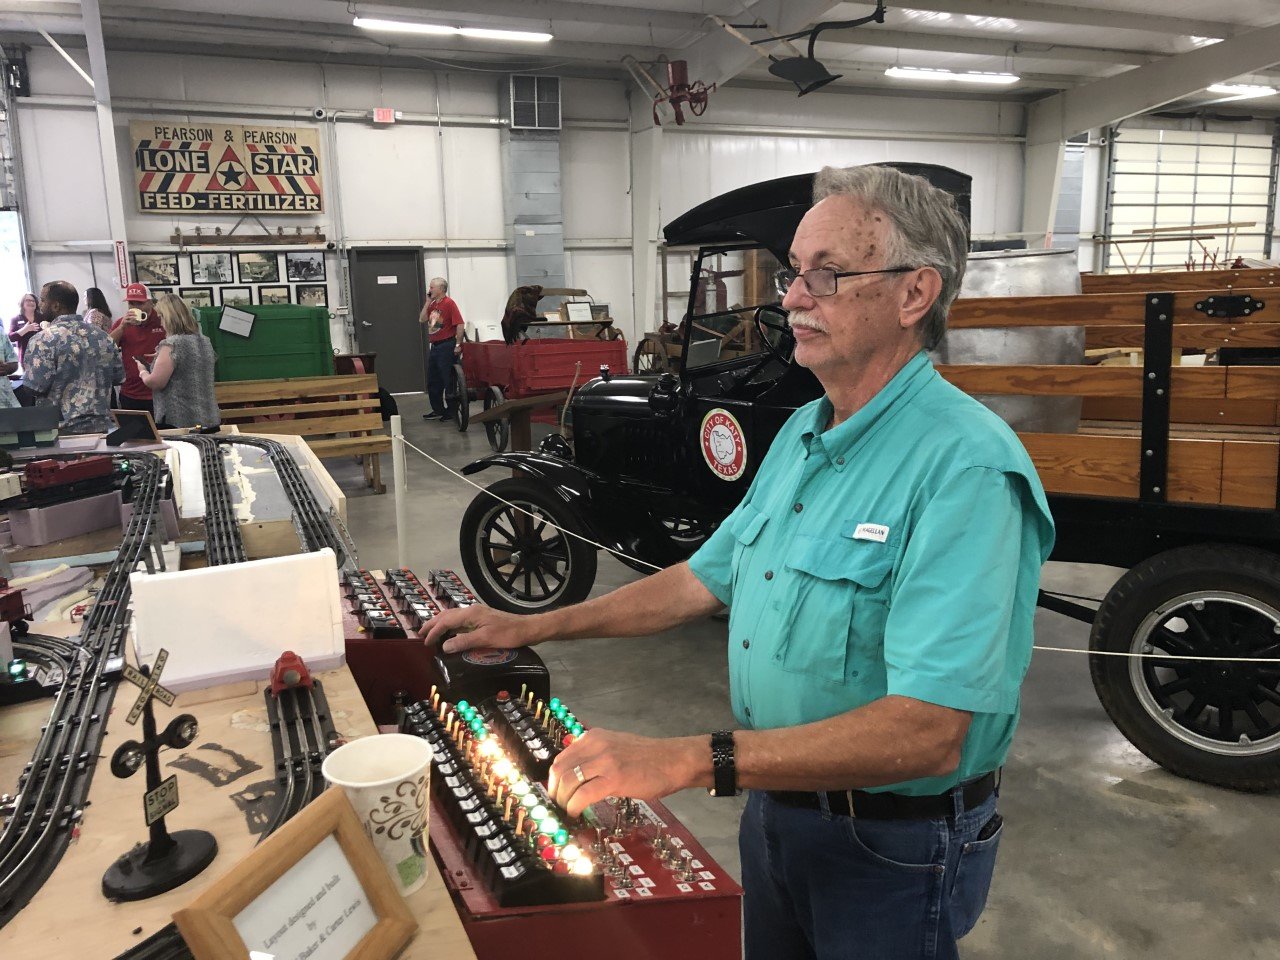 Richard Baker operates the model railroad.at the Johnny Nelson Katy Heritage Museum.